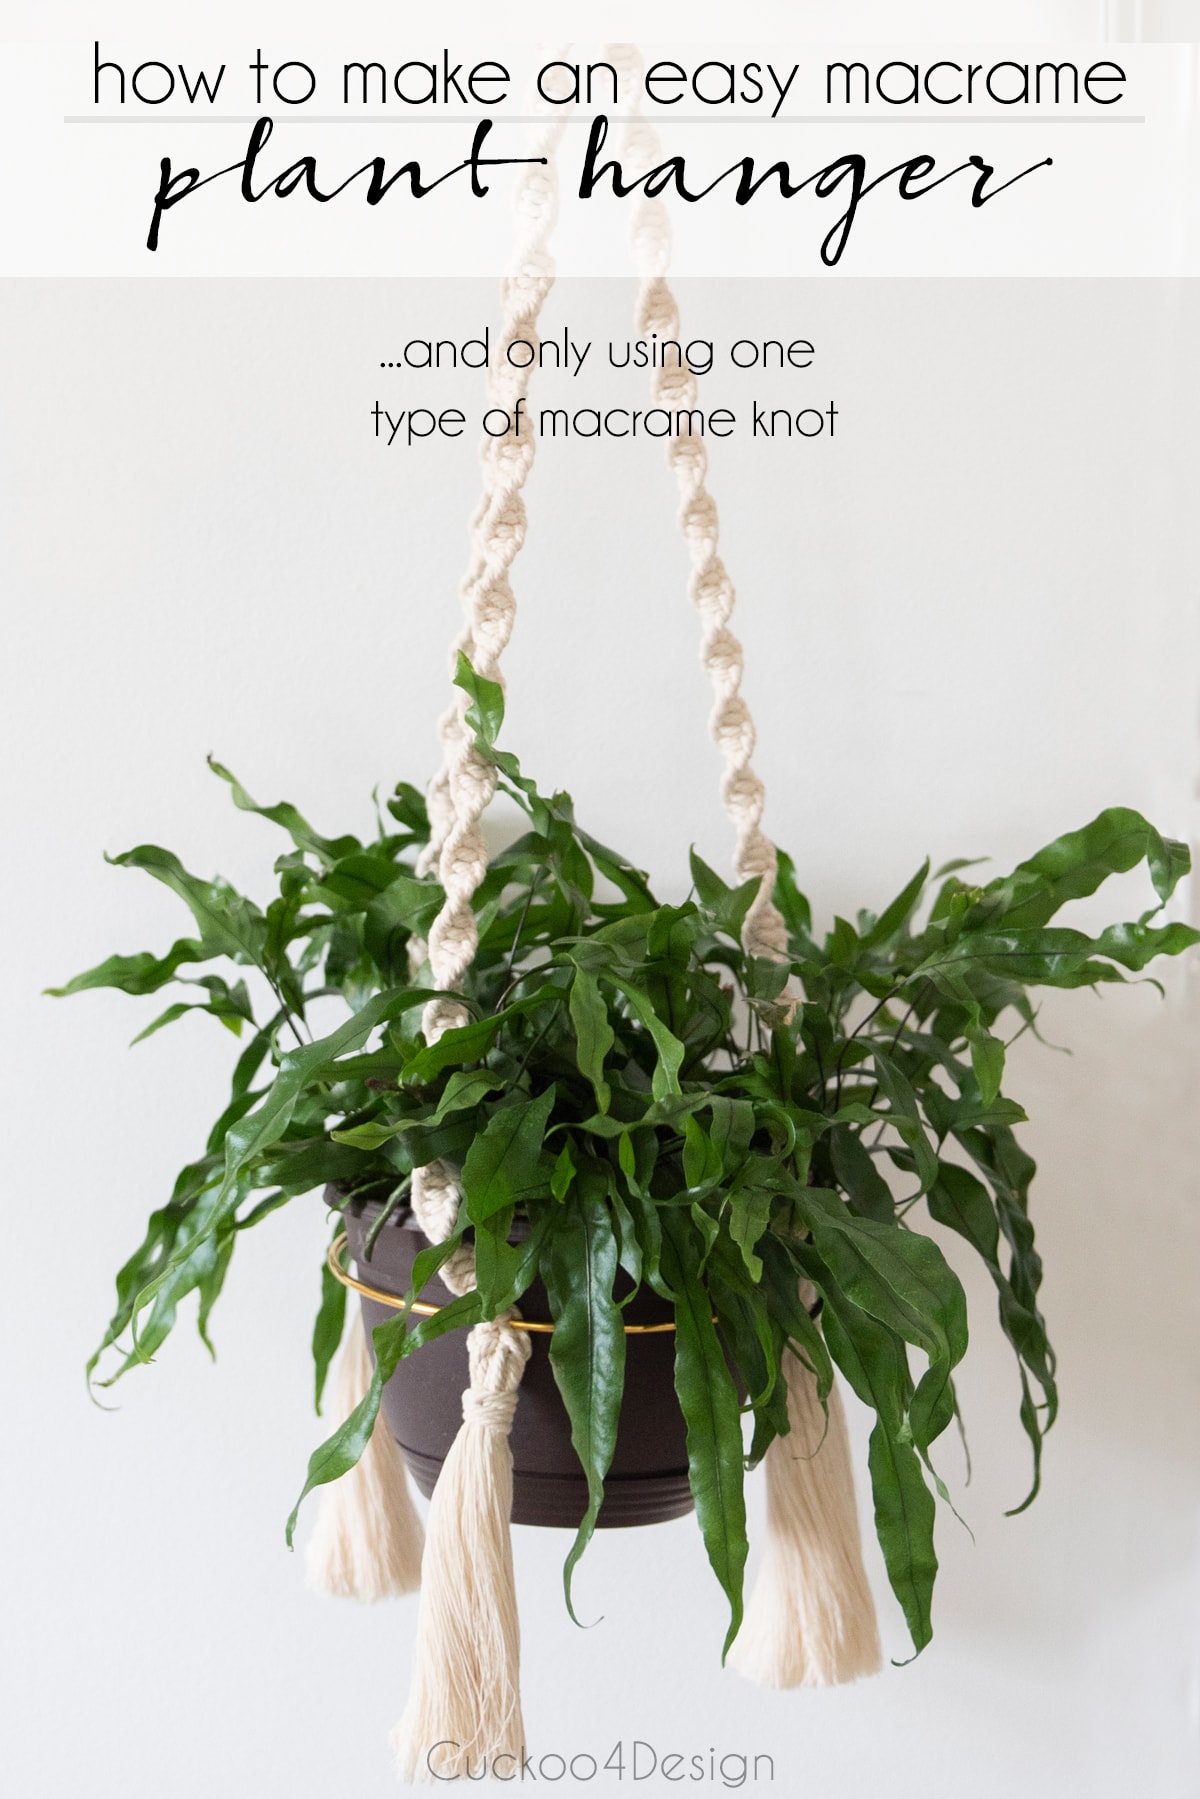 how to make an easy macrame planter using only one type of knot